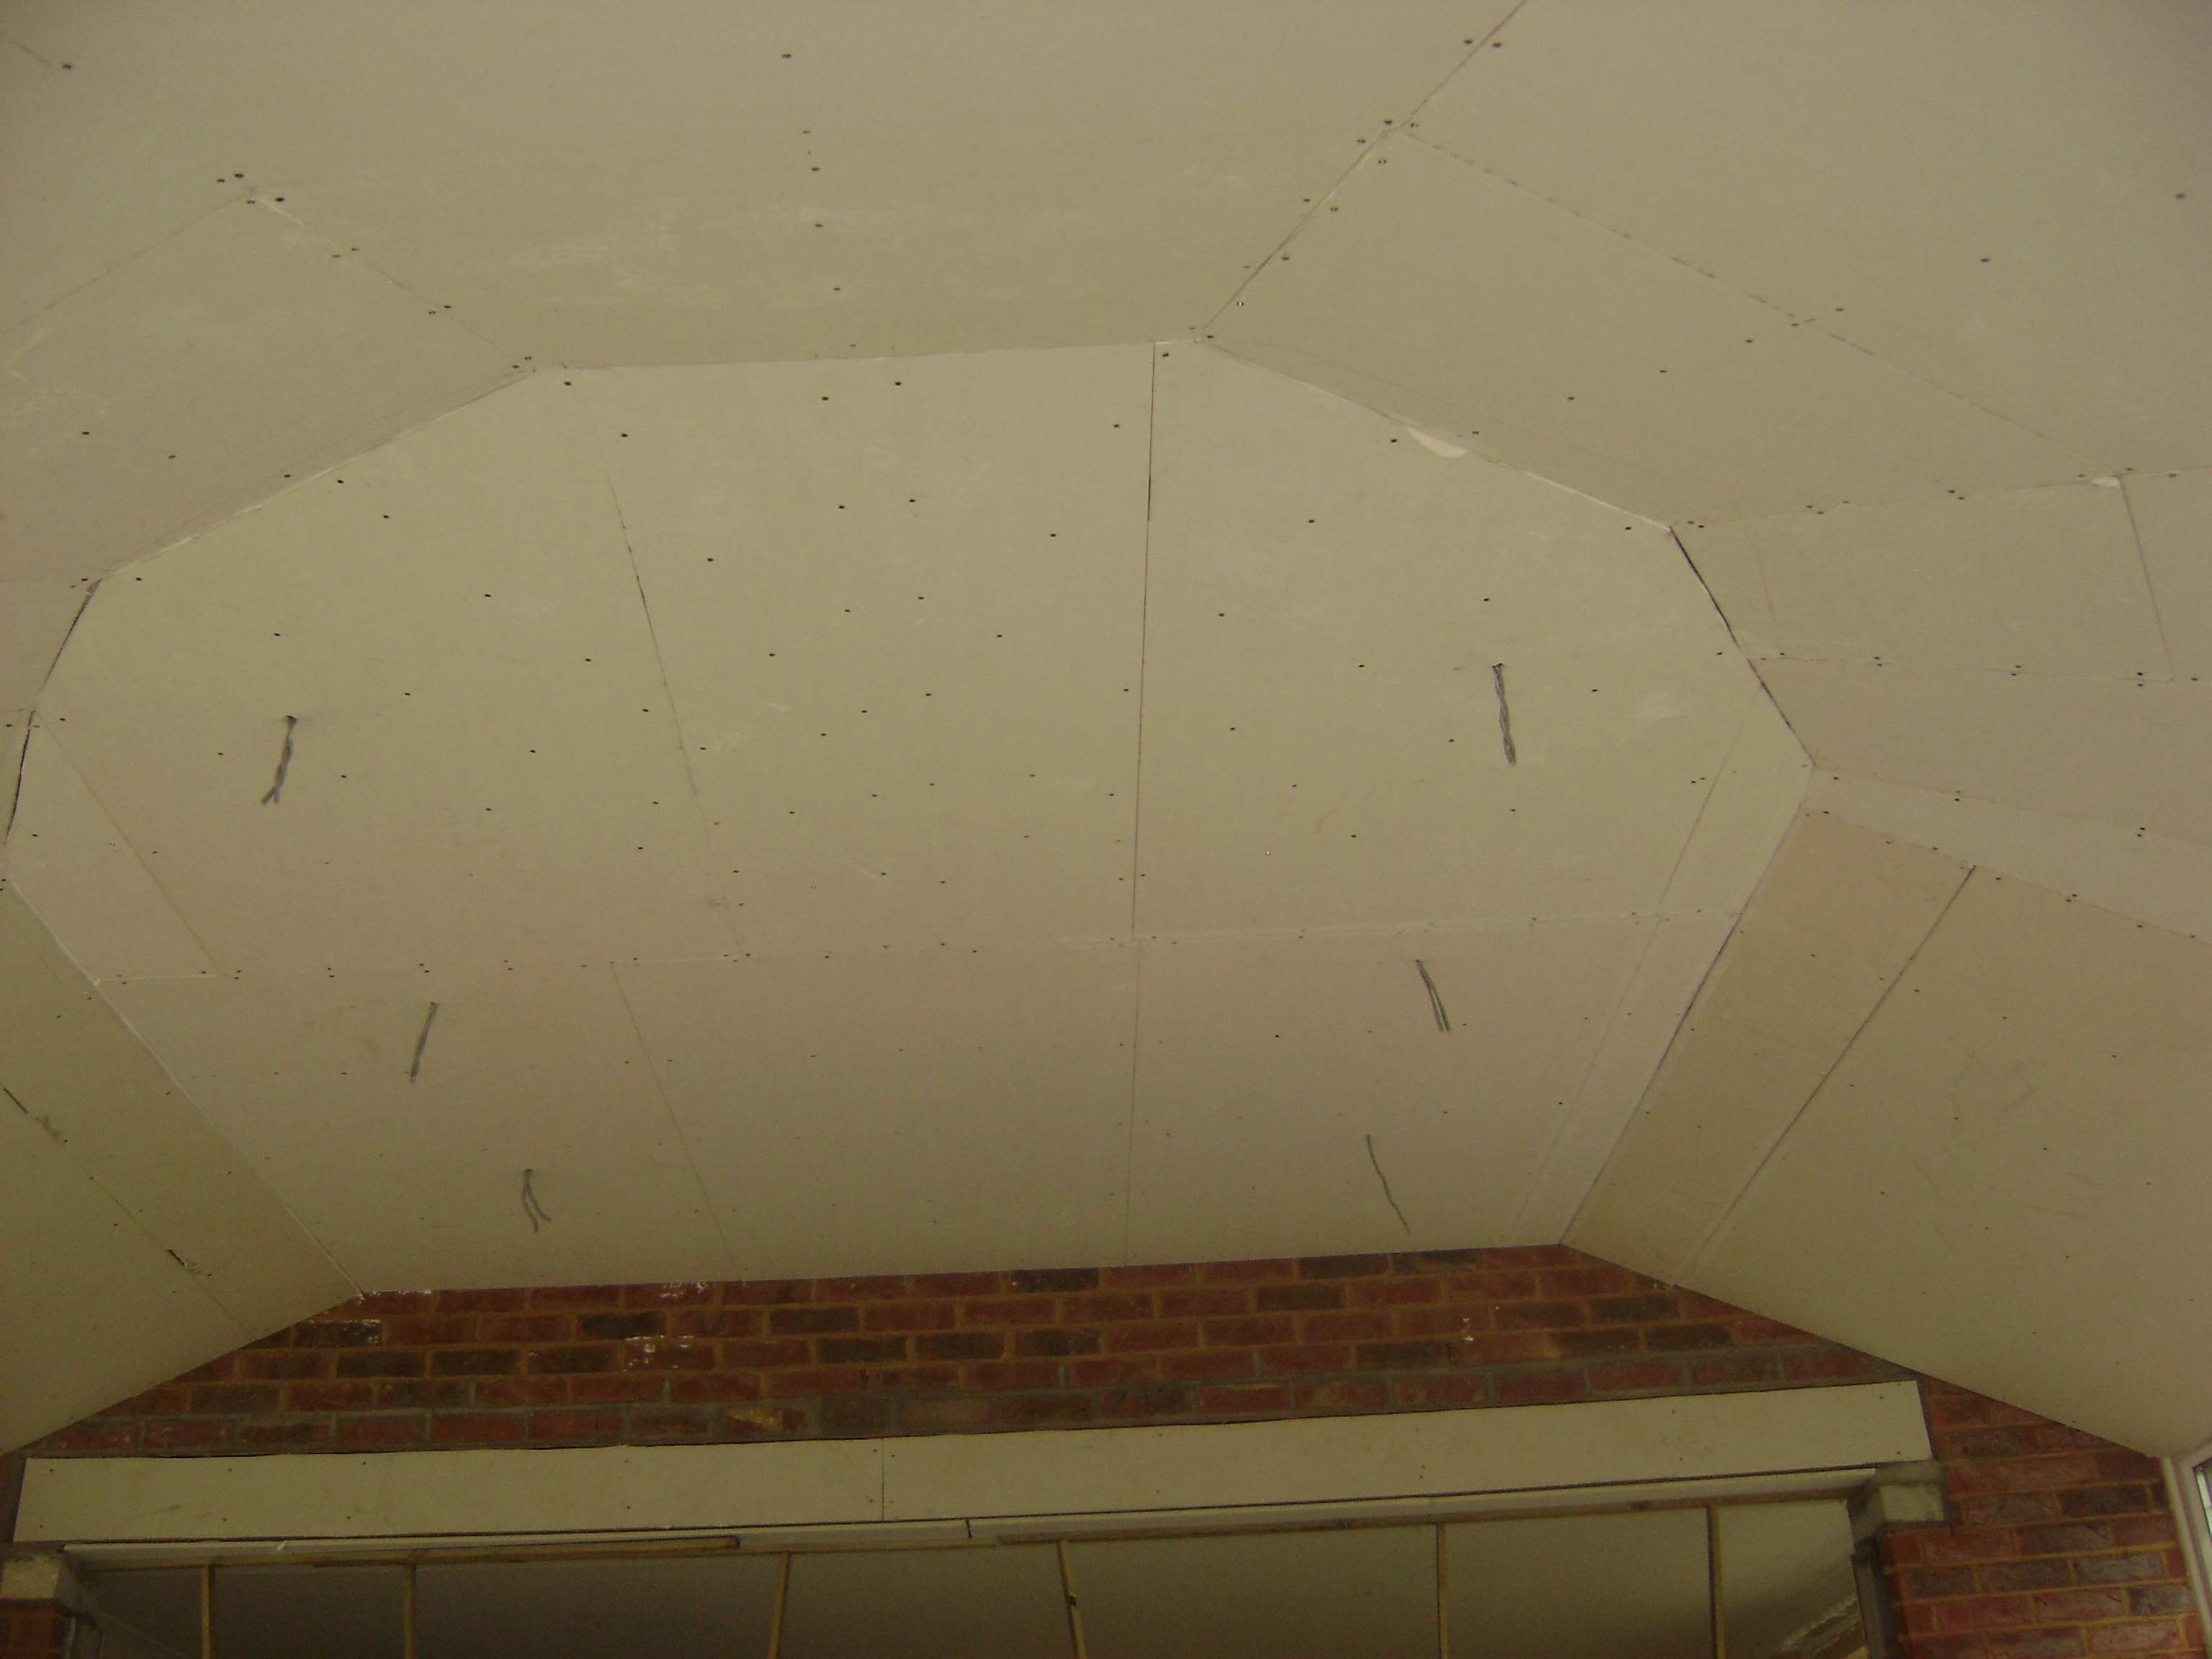 Following completion of insulation the ceiling was boarded, the cutting of the boards caused a bit of head scratching to make sure it all looked totally symetrical